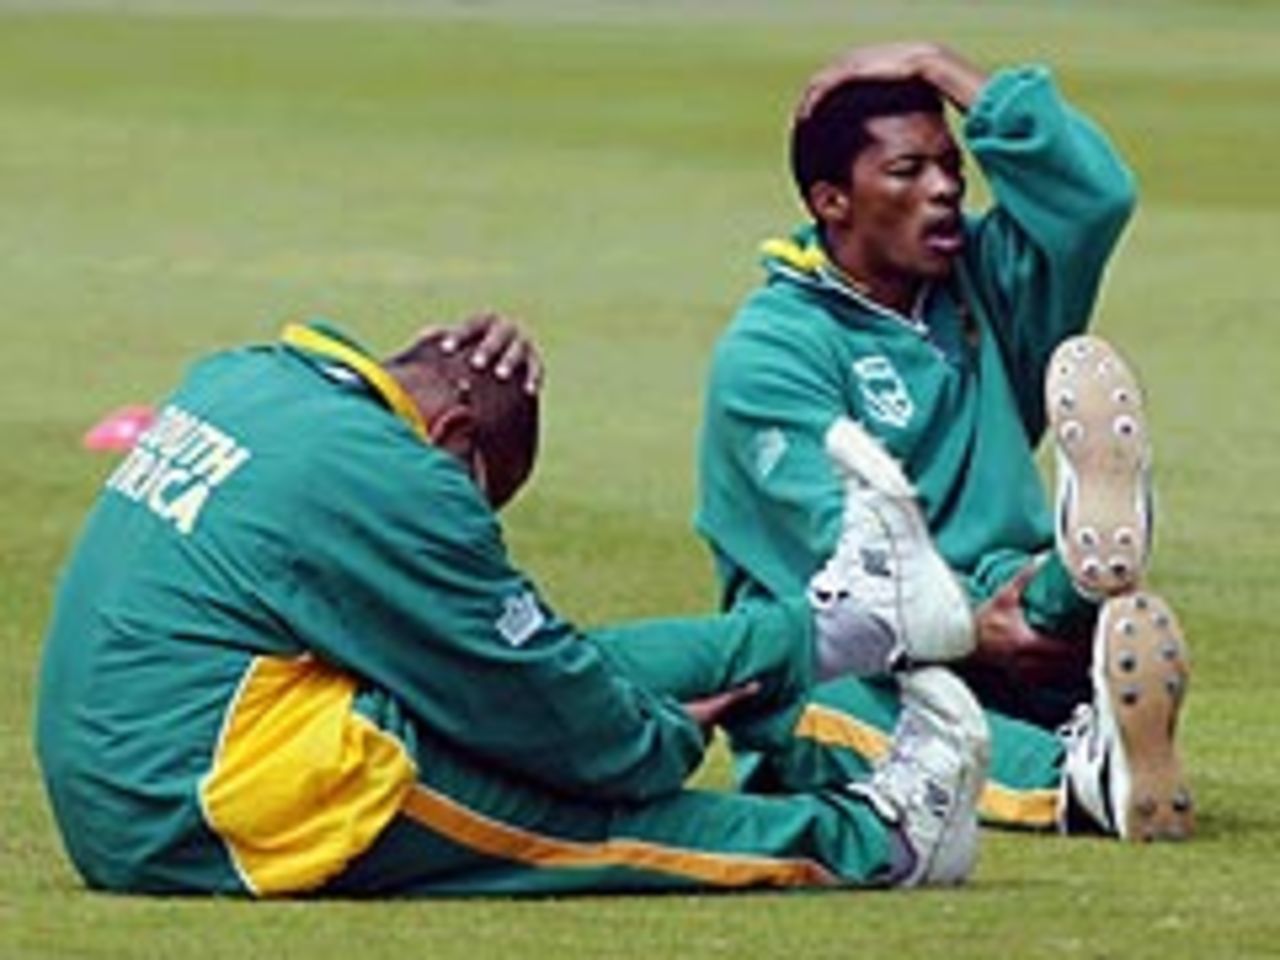 Makhaya Ntini and Paul Adams warm up ahead of South Africa's match against Sussex on Friday